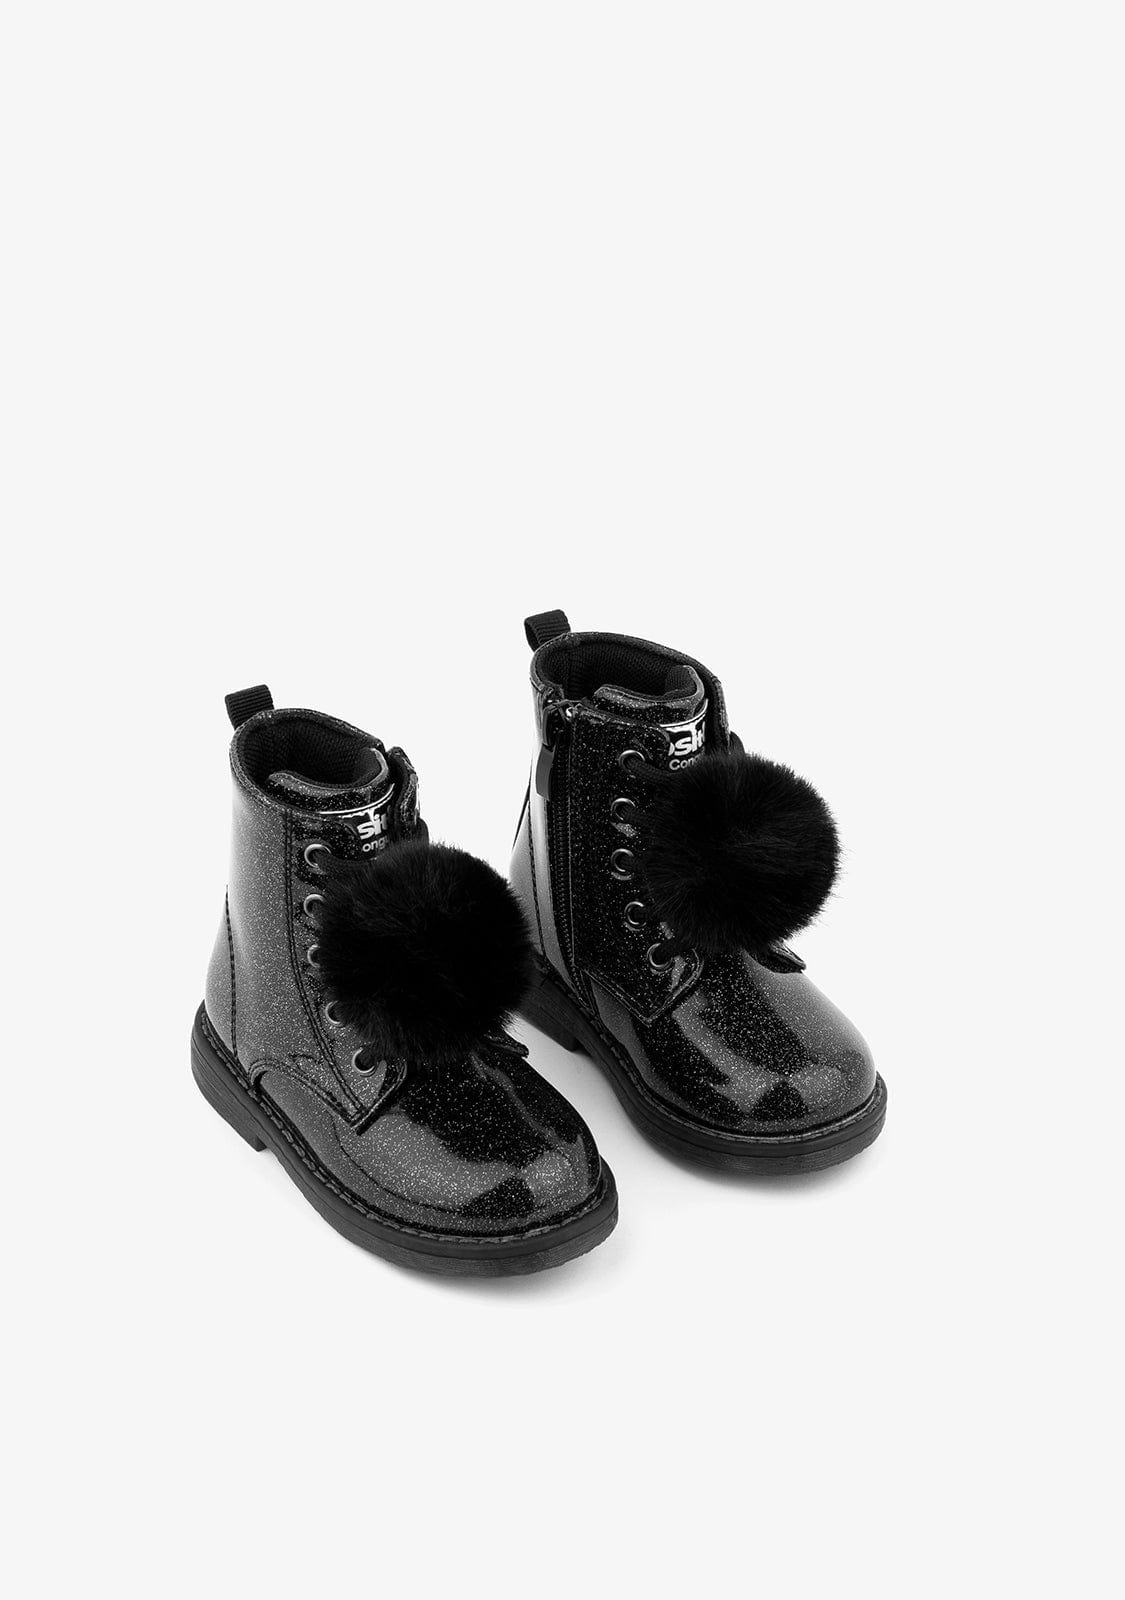 OSITO Shoes Baby's Black Glitter Patent Ankle Boots With Detail